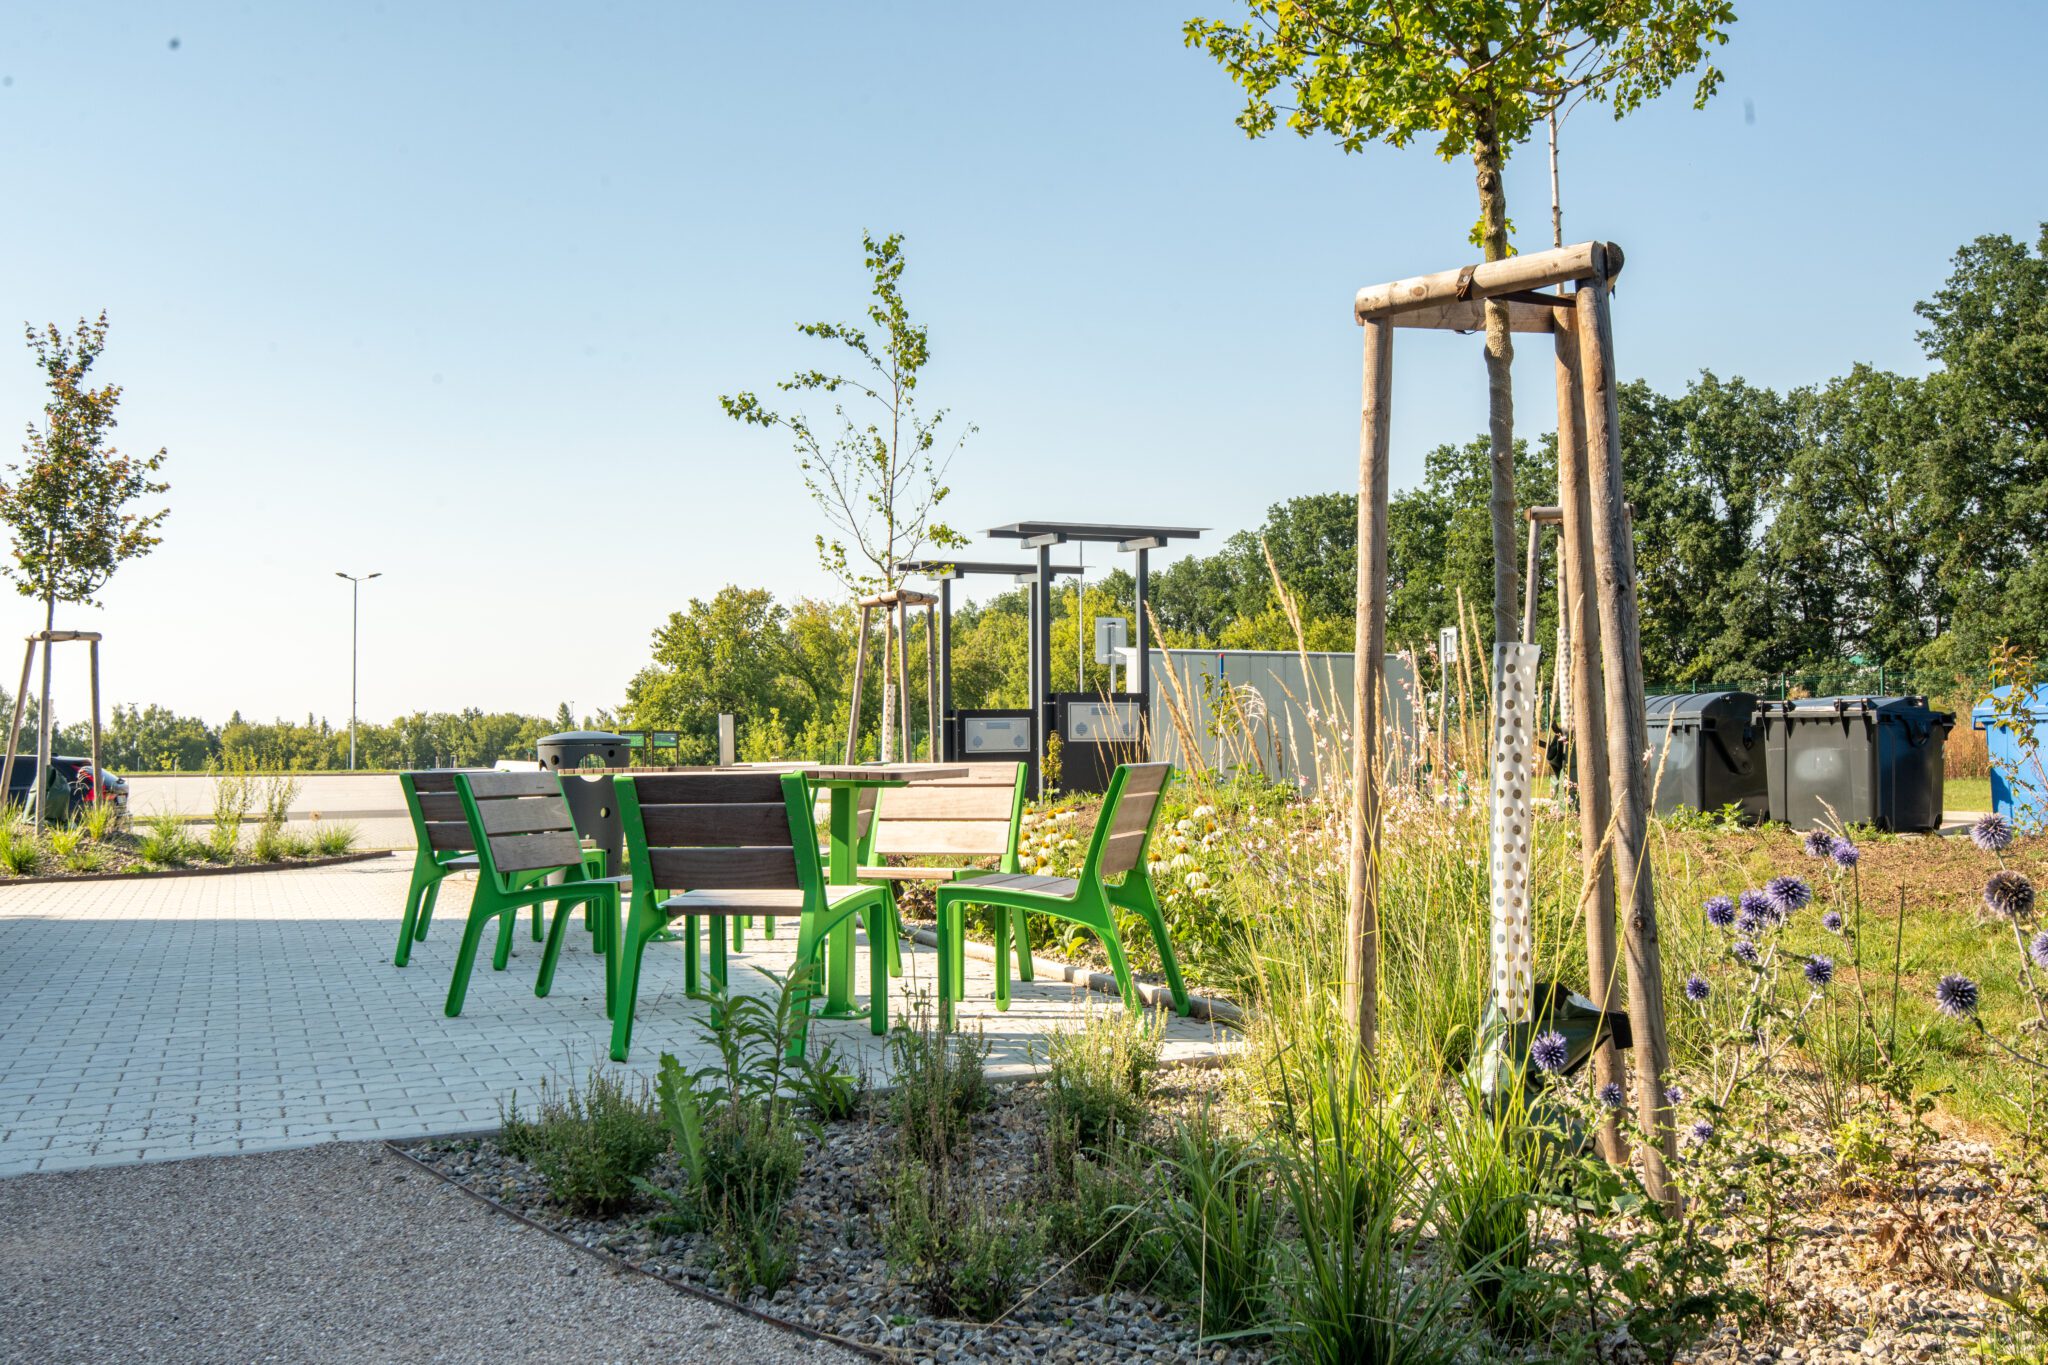 Seating area outside of a GLP warehouse with greenery, a green oasis outside of an industrial zone.